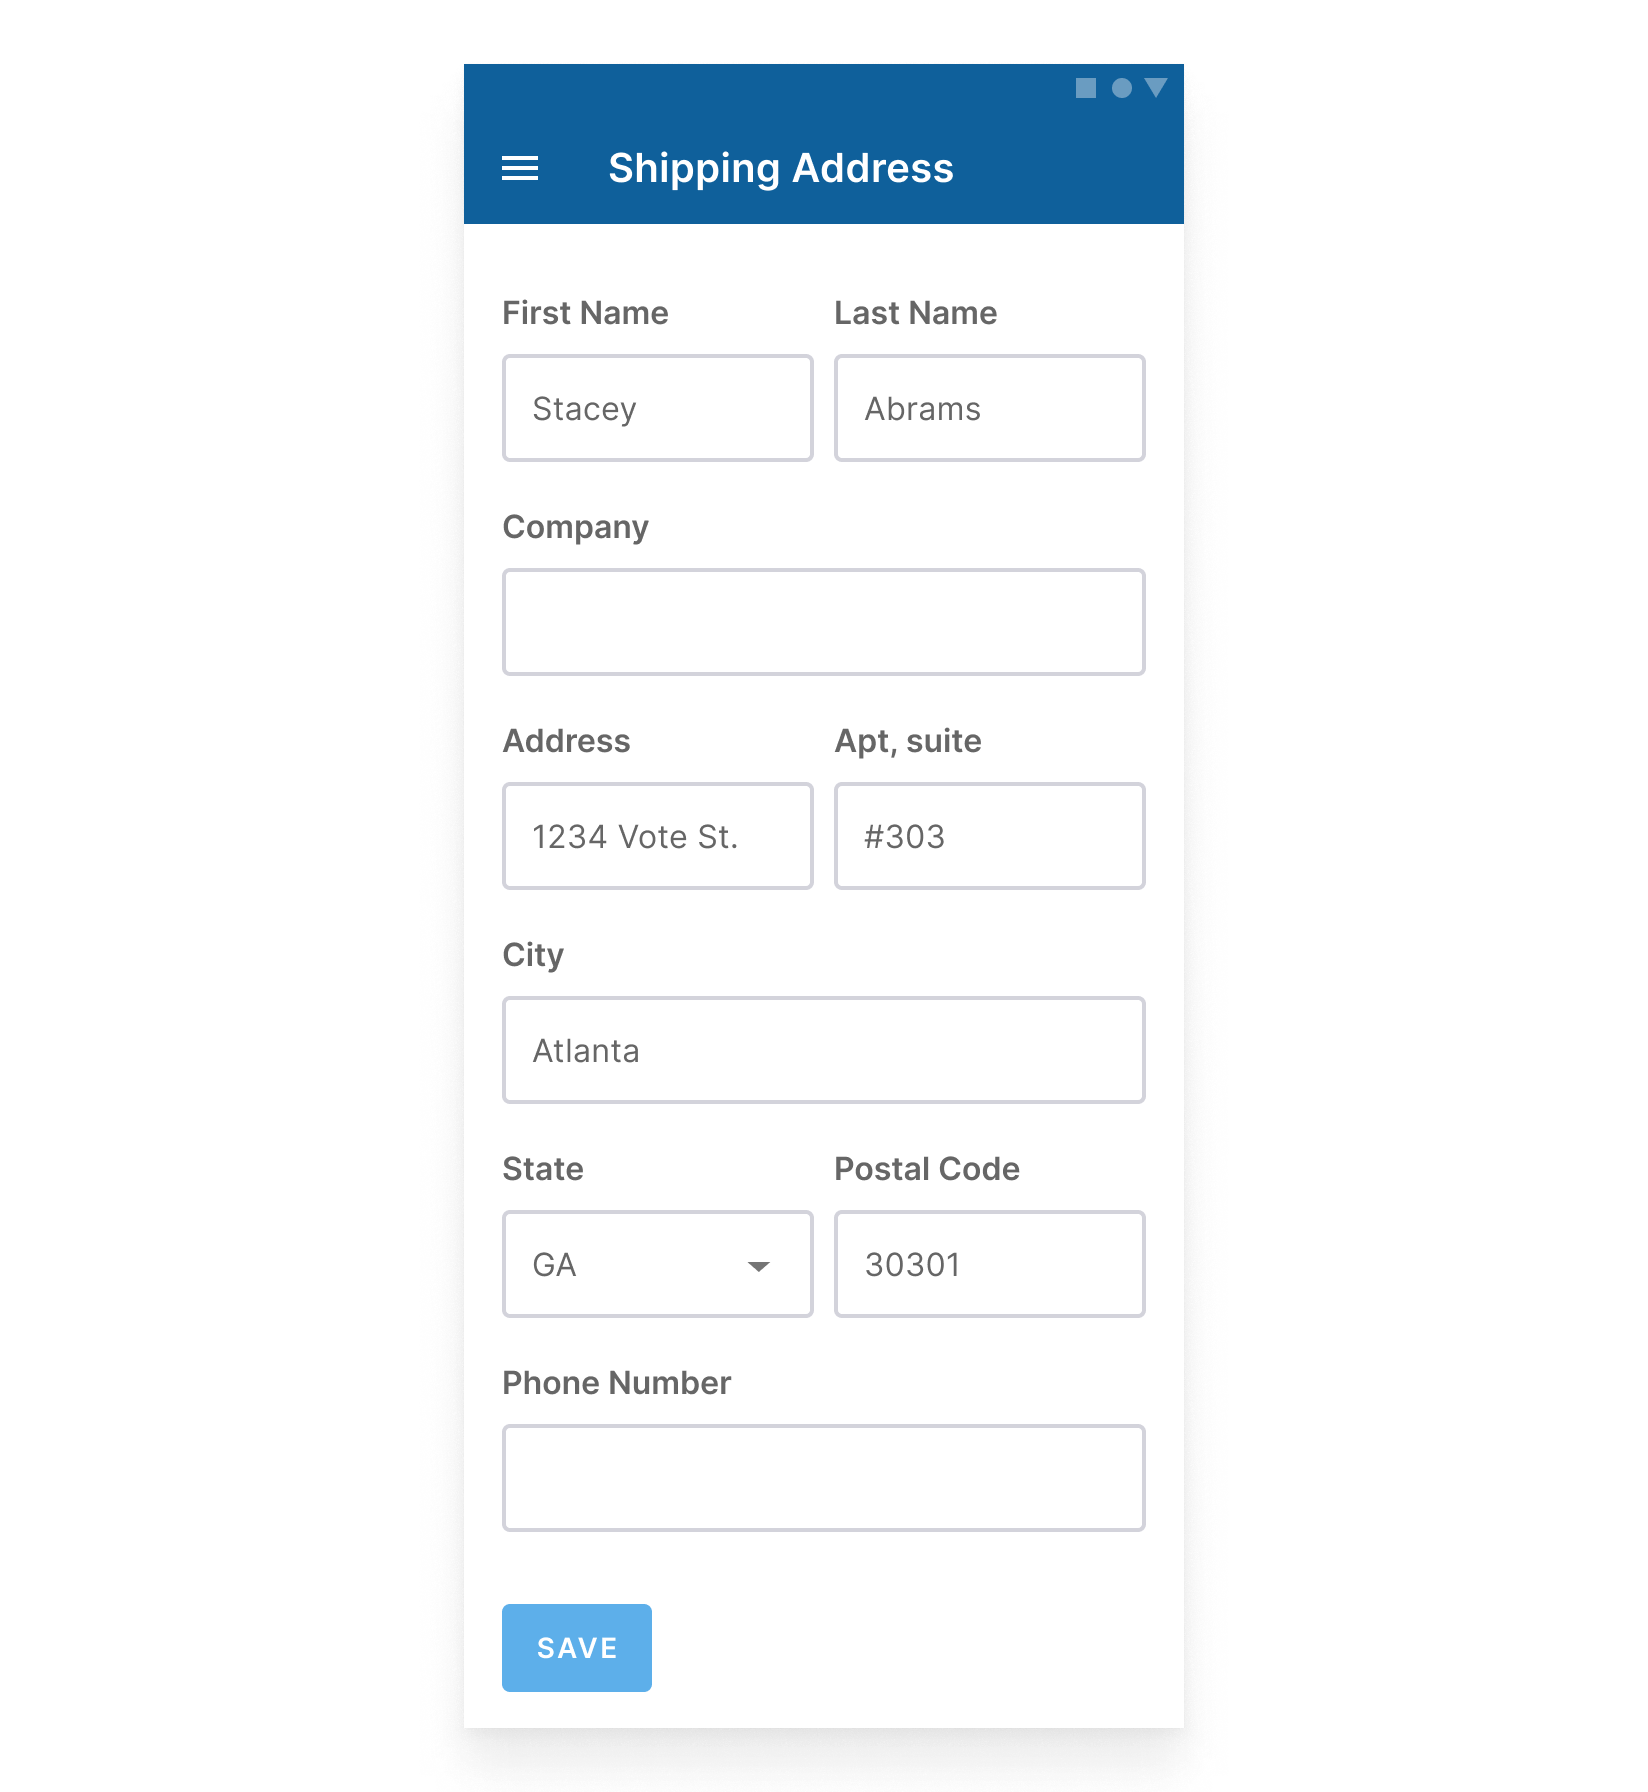 An Android app page for Shipping Address that includes: First Name, Last Name, Company, Address, Apt/suite, City, State, Postal Code and Phone Number, then a "save" button.